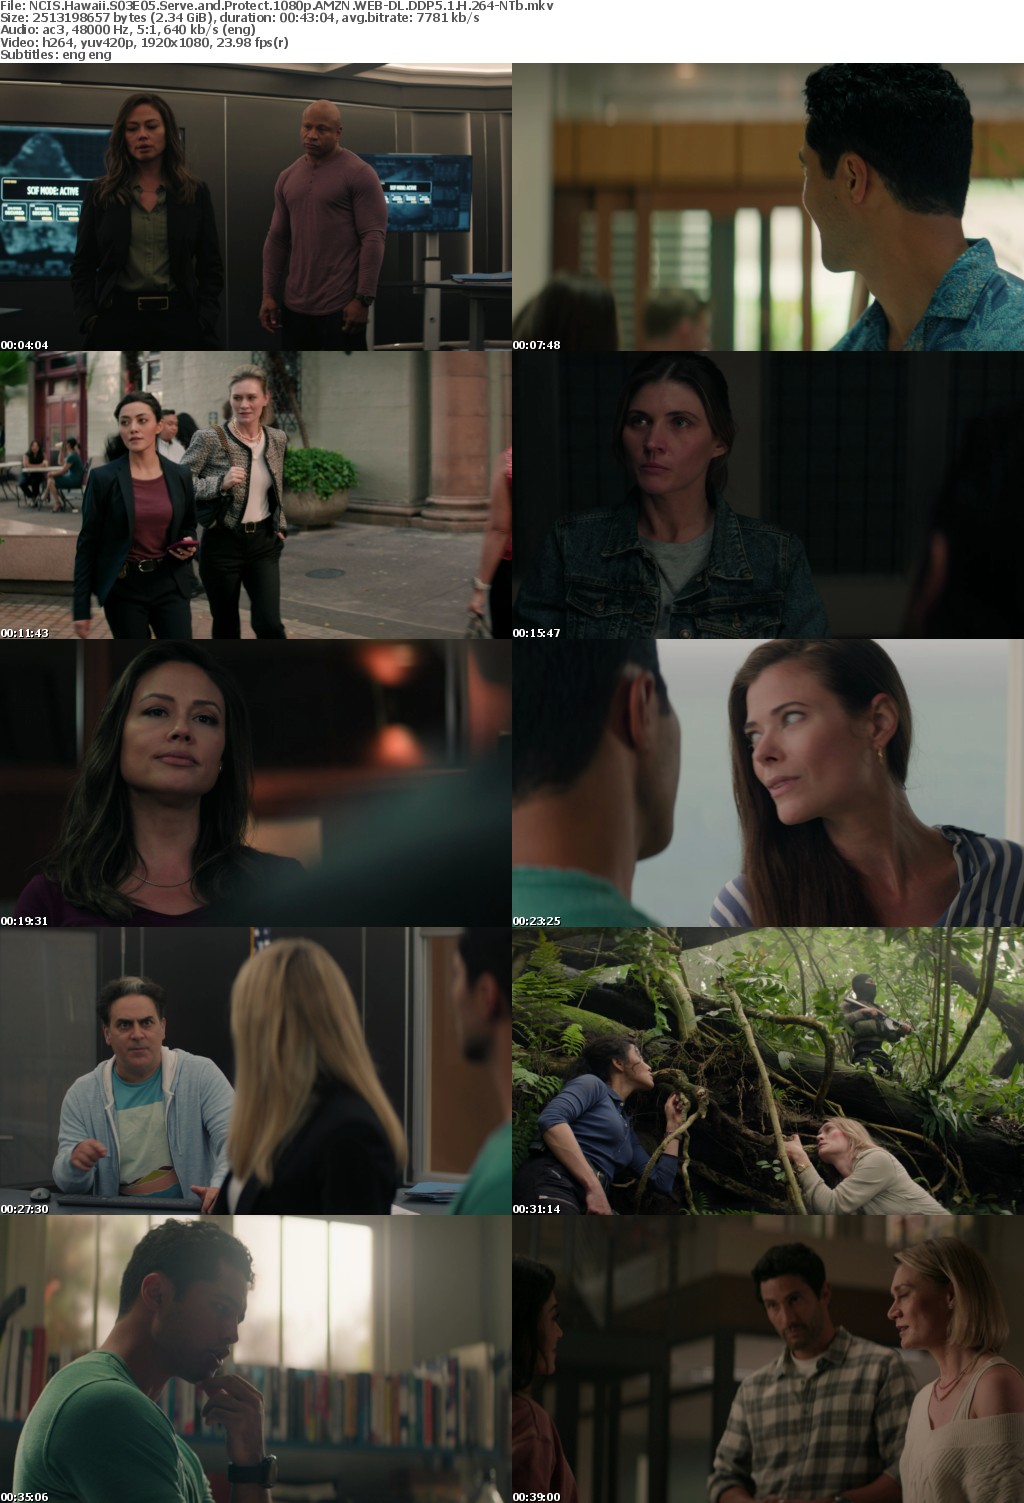 NCIS Hawaii S03E05 Serve and Protect 1080p AMZN WEB-DL DDP5 1 H 264-NTb